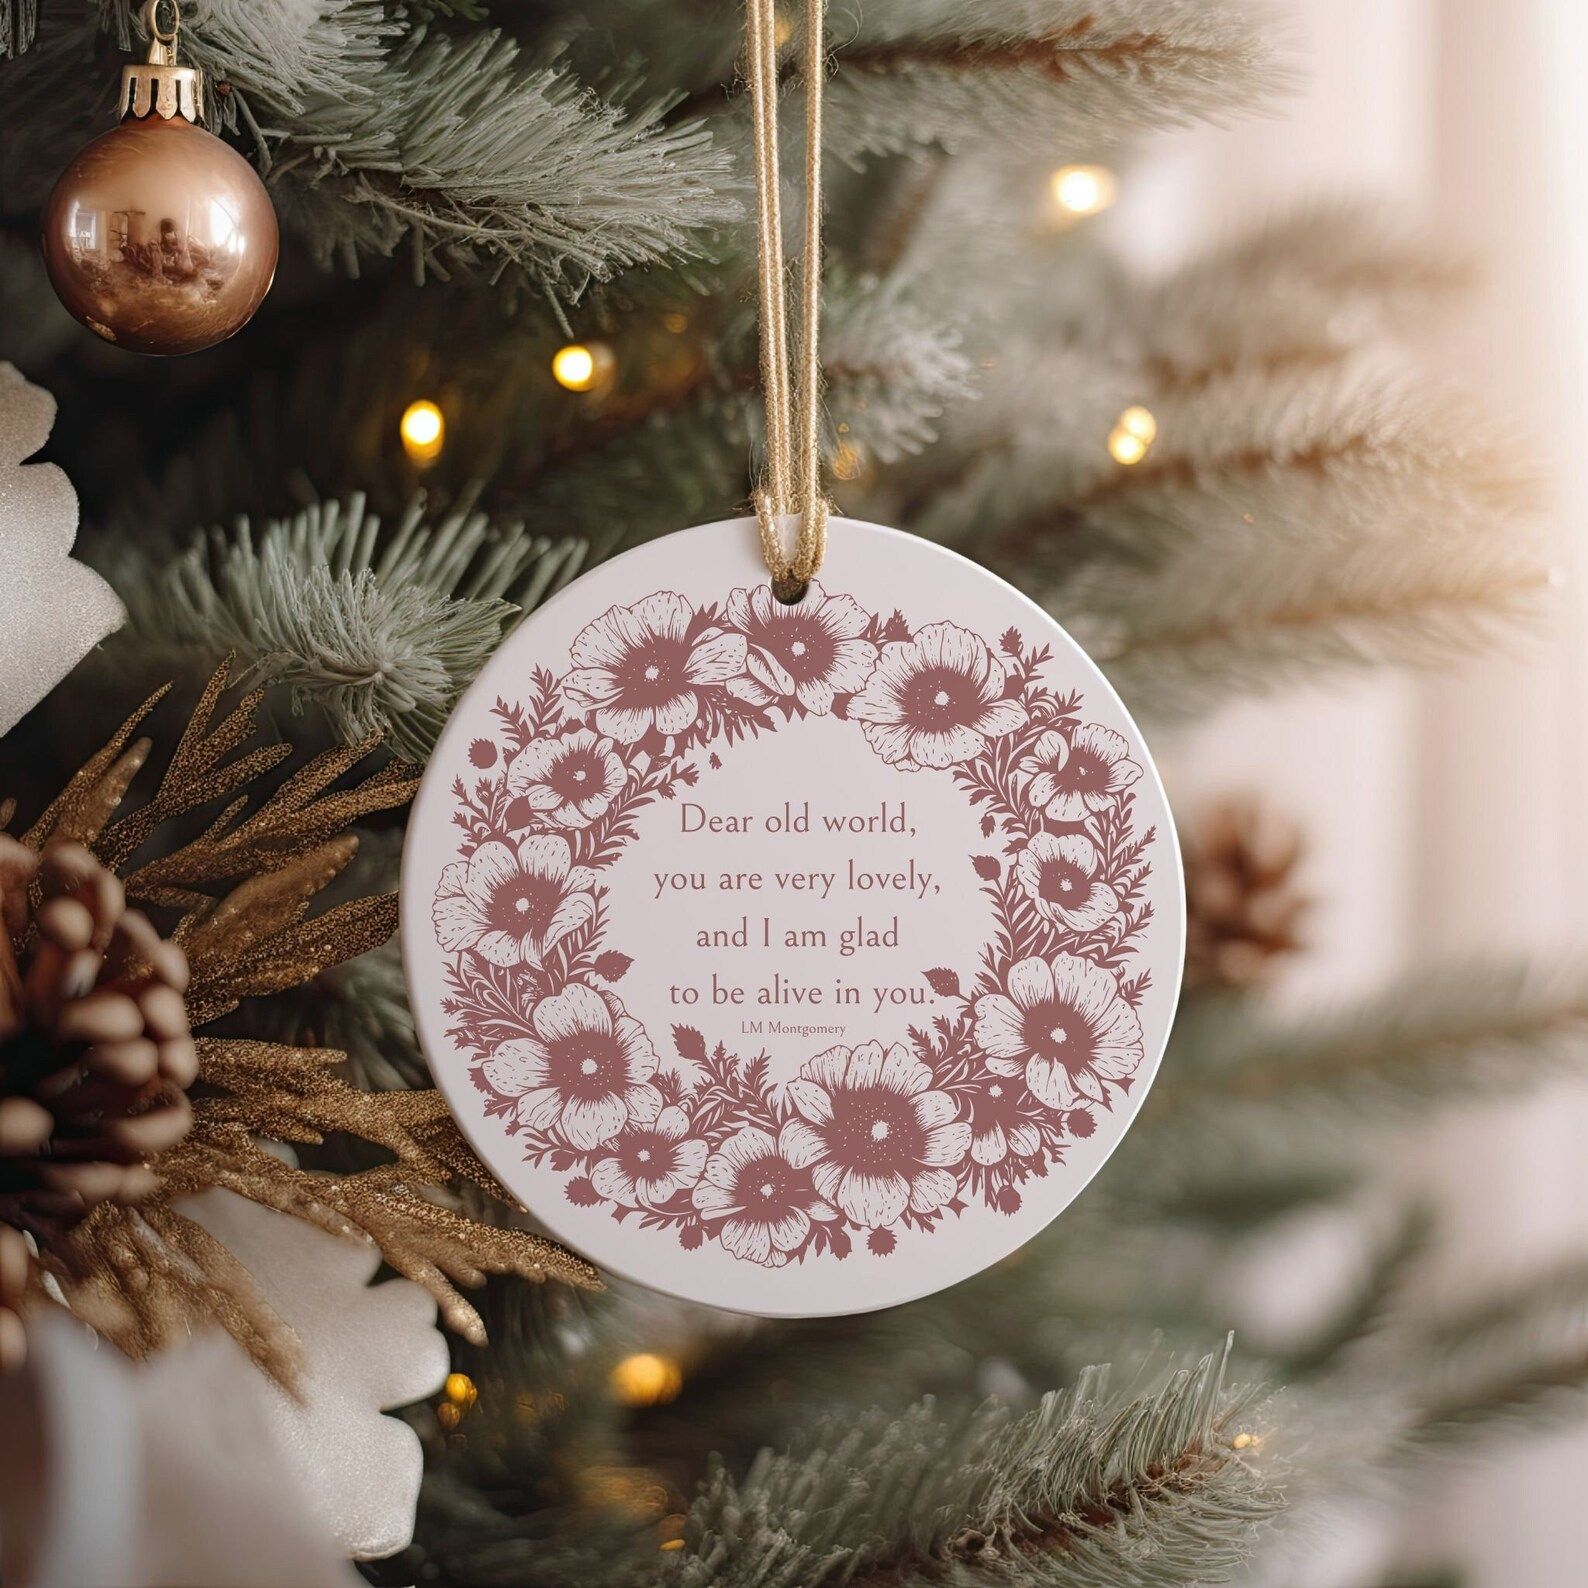 a round ceramic ornament with a flower border and the quote "Dear old world, you are very lovely, and I am glad to be alive in you."